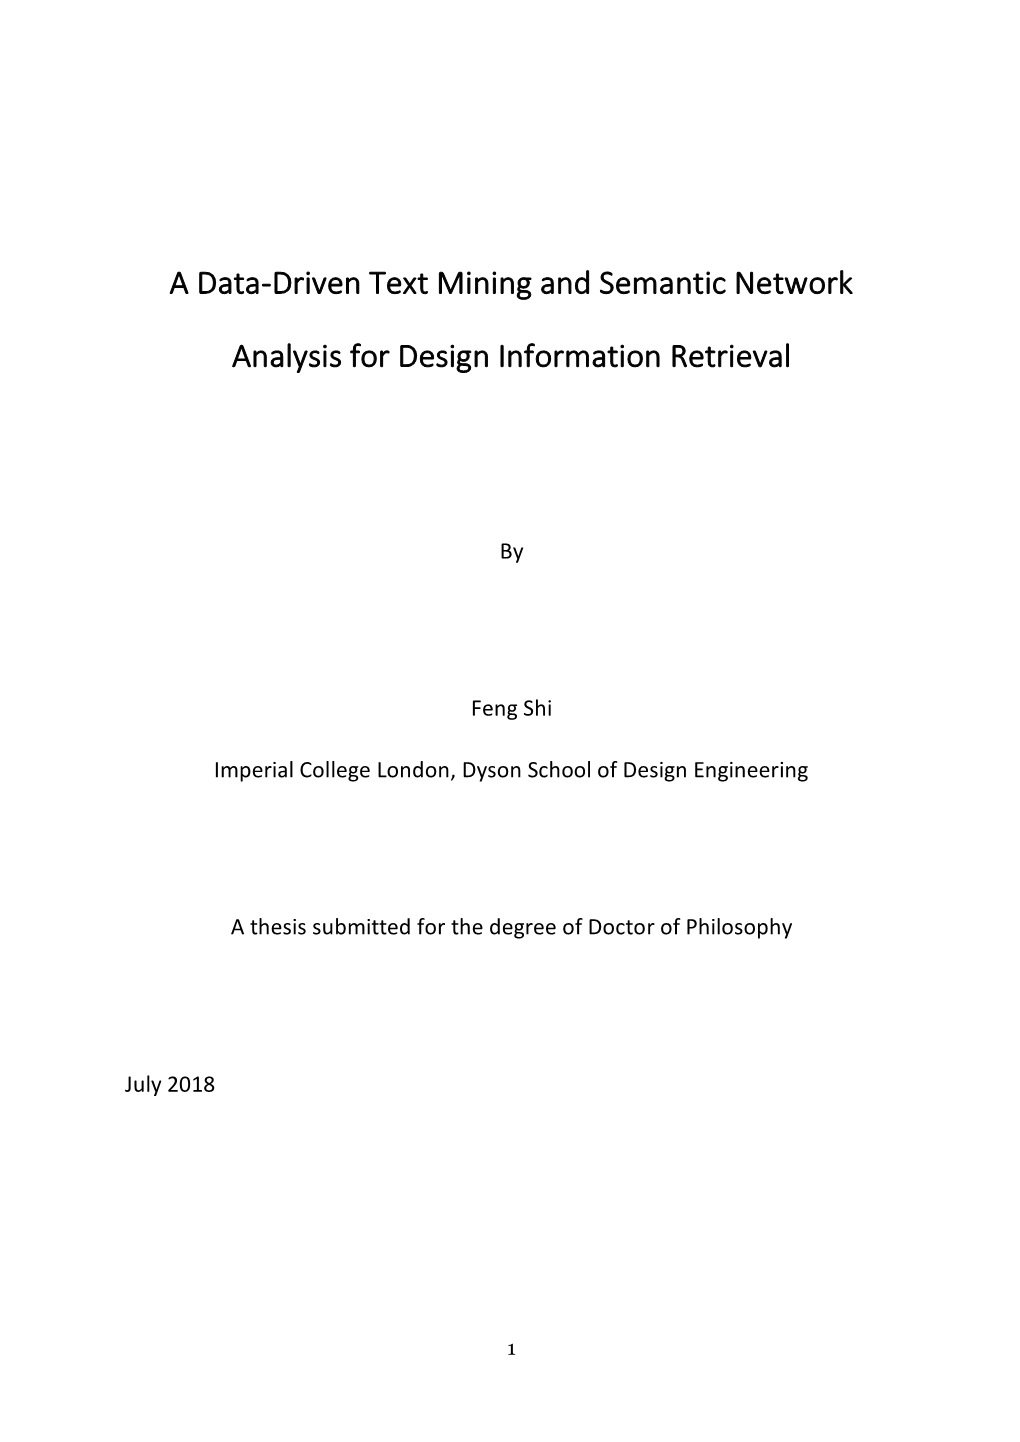 A Data-Driven Text Mining and Semantic Network Analysis for Design Information Retrieval